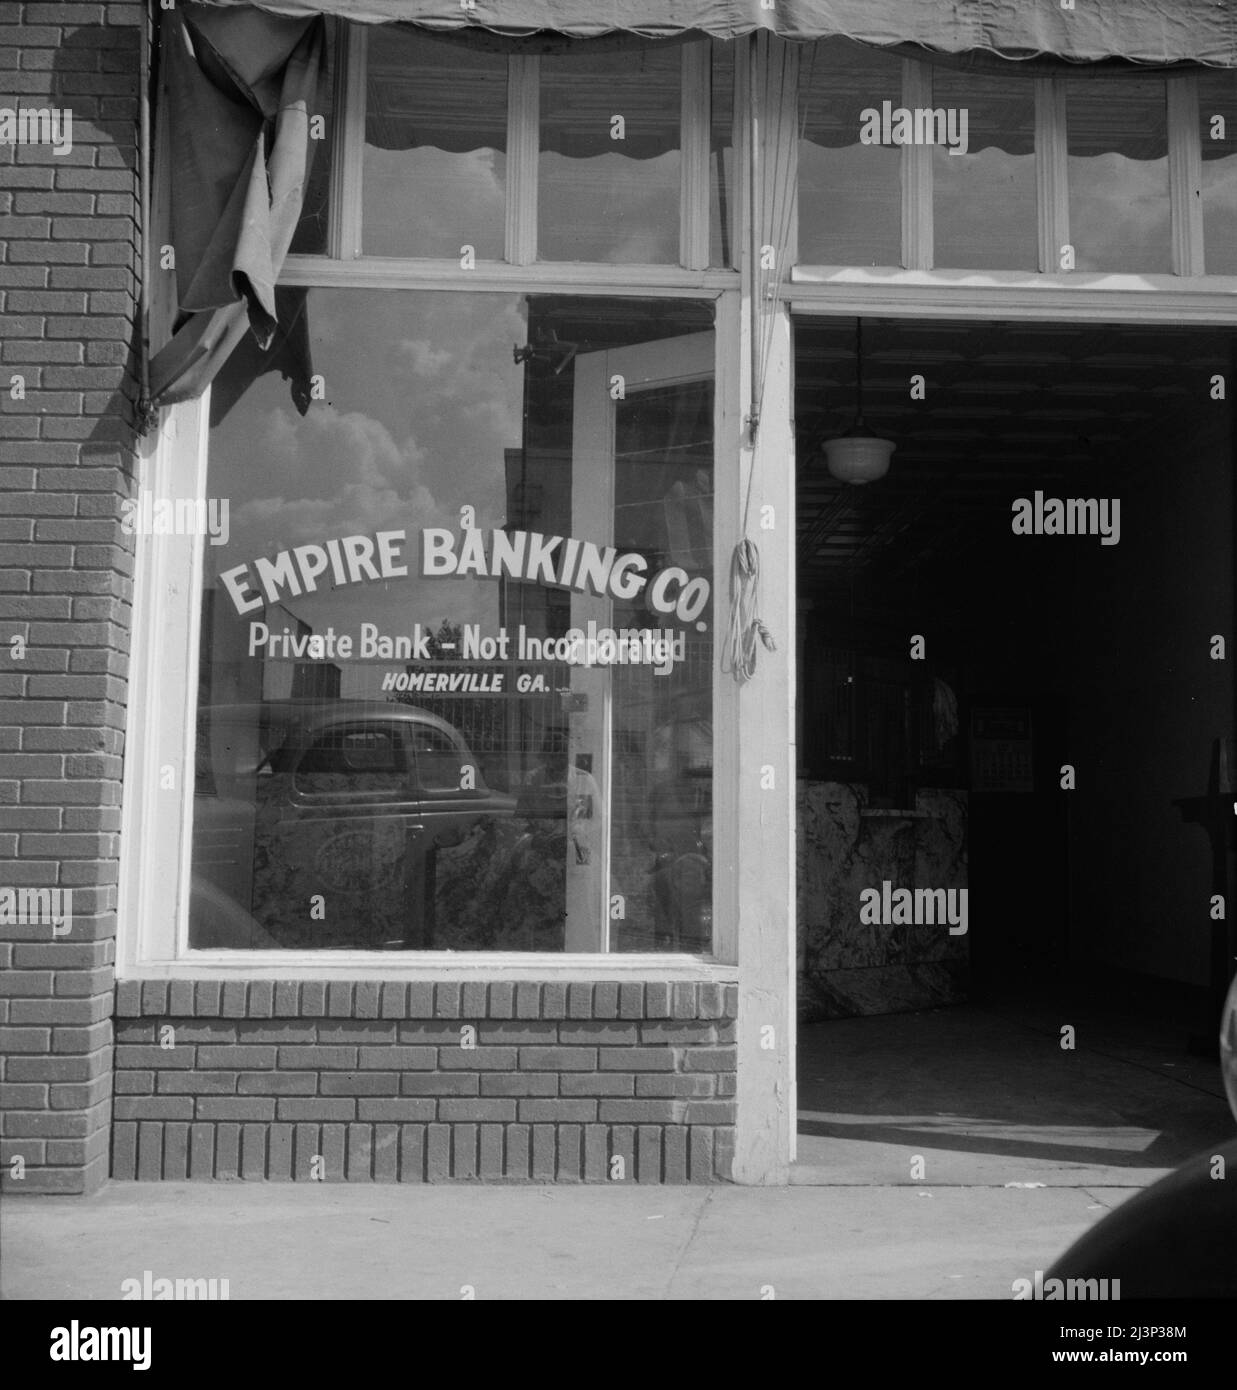 Bank at Homerville, Georgia. ['Empire Banking Co. Private Bank - Not Incorporated']. Stock Photo